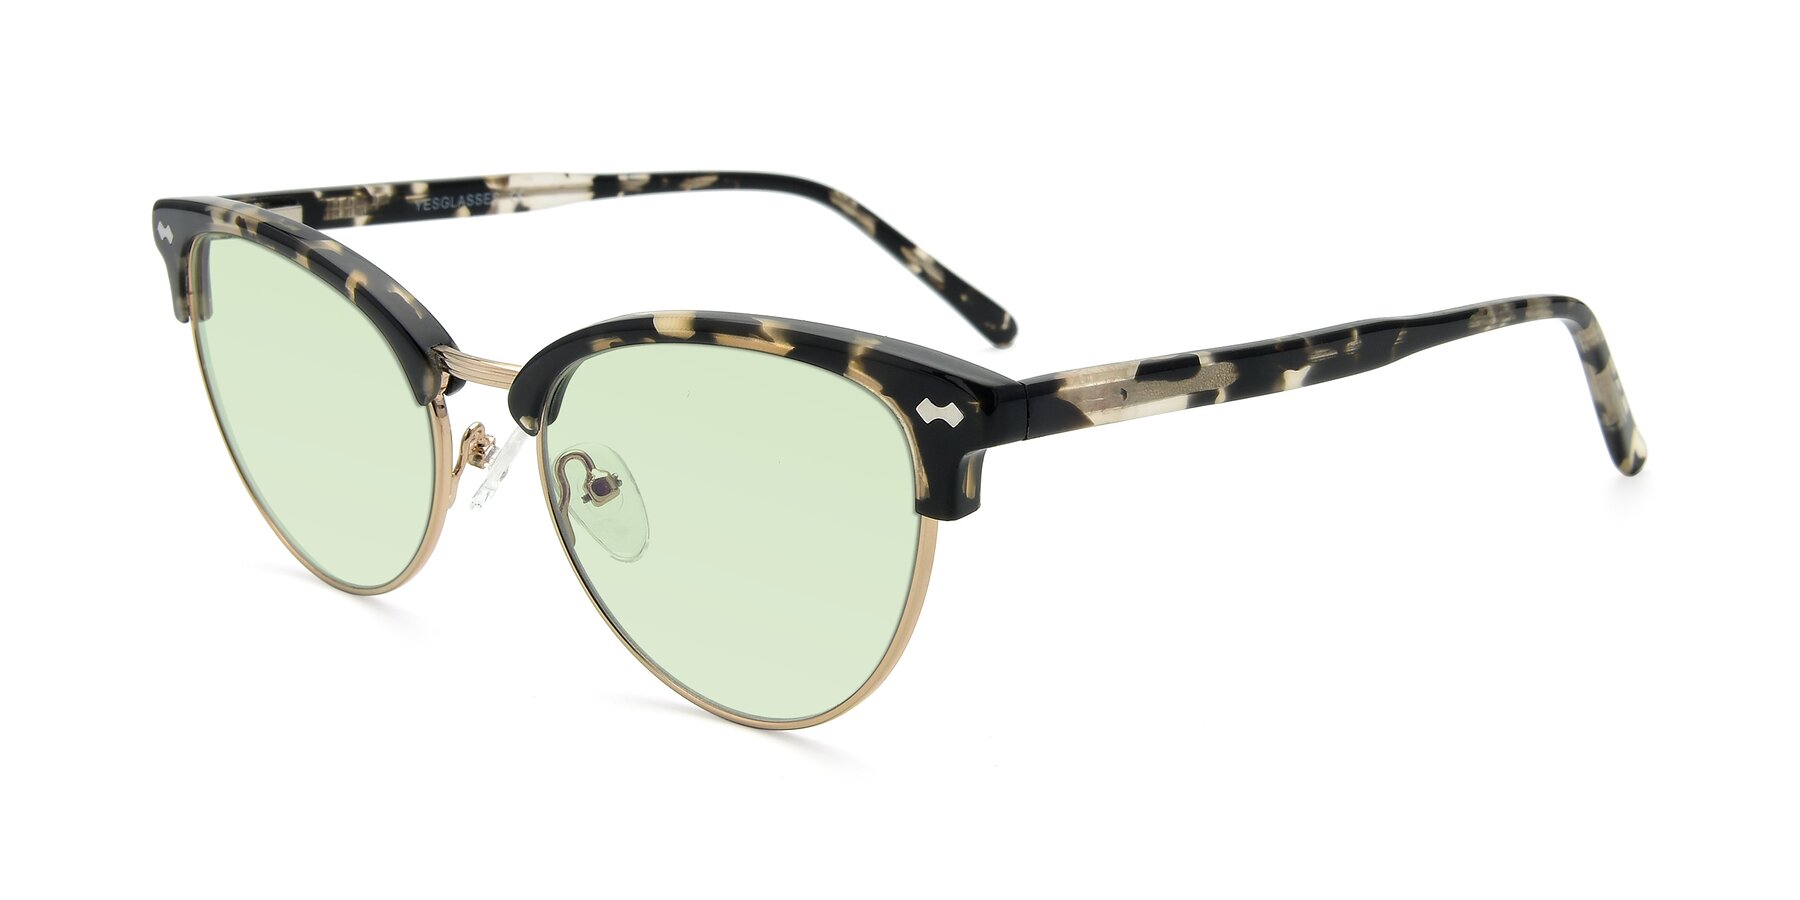 Angle of 17461 in Tortoise-Gold with Light Green Tinted Lenses